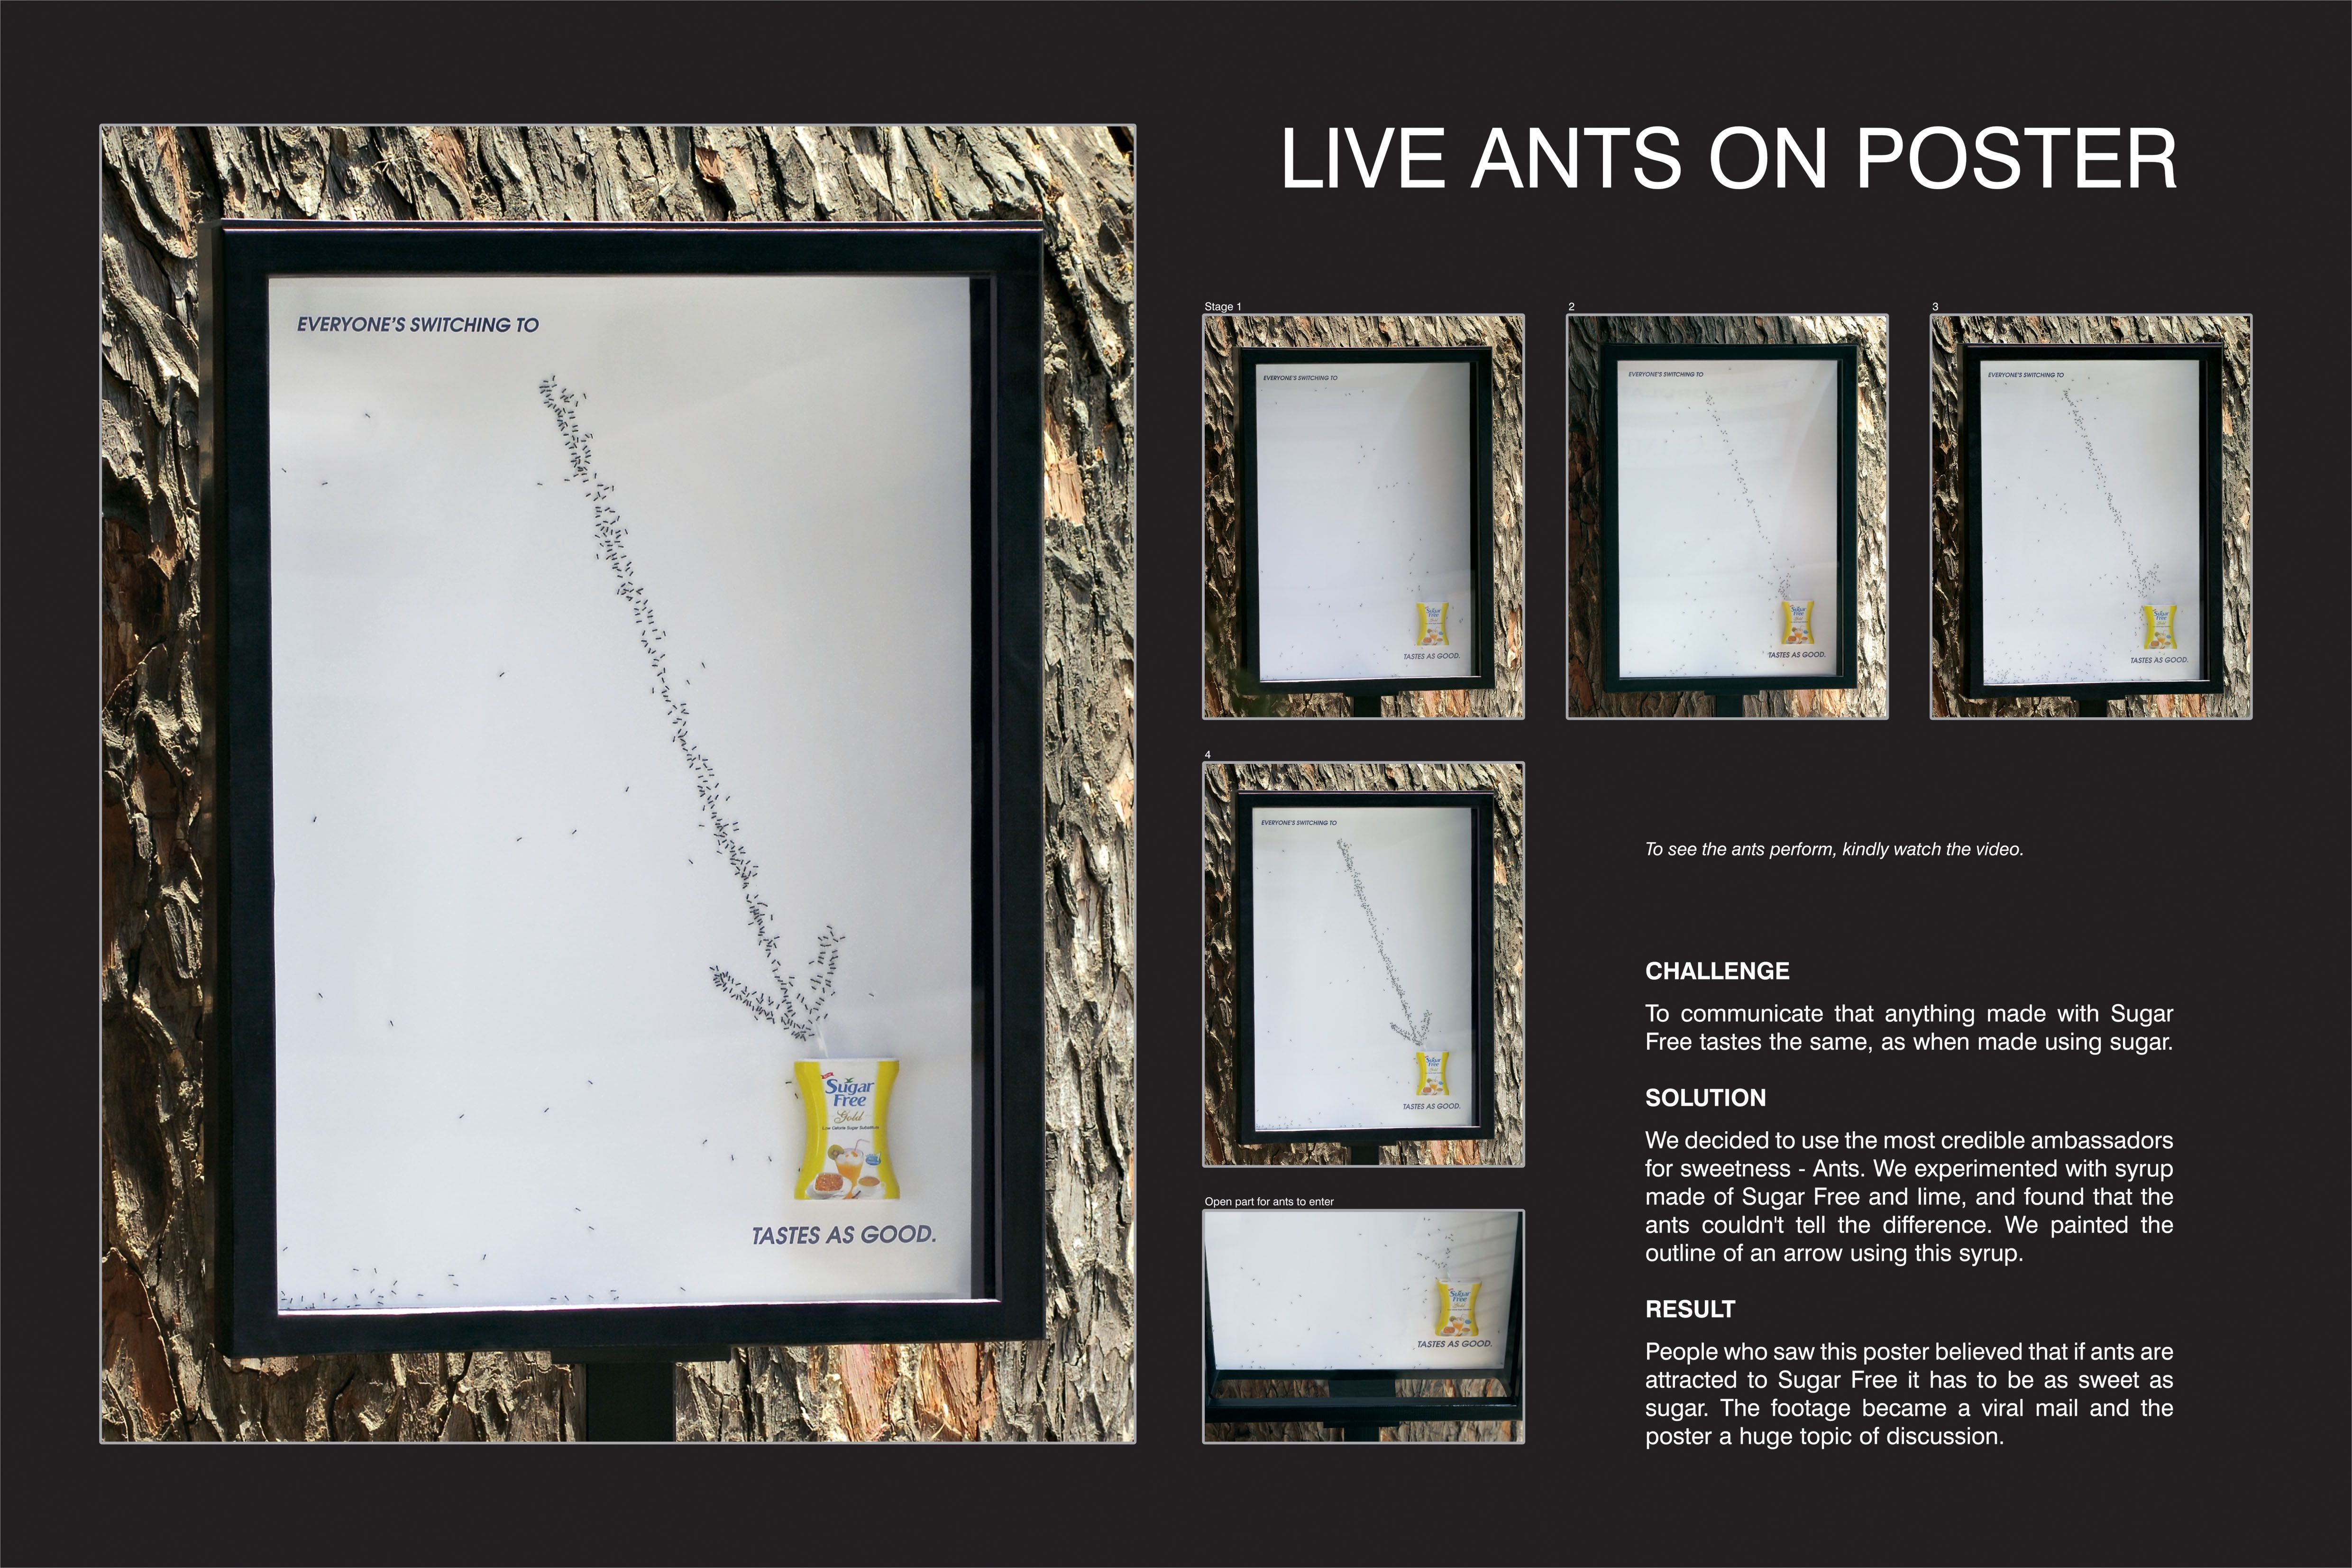 LIVE ANTS ON POSTER